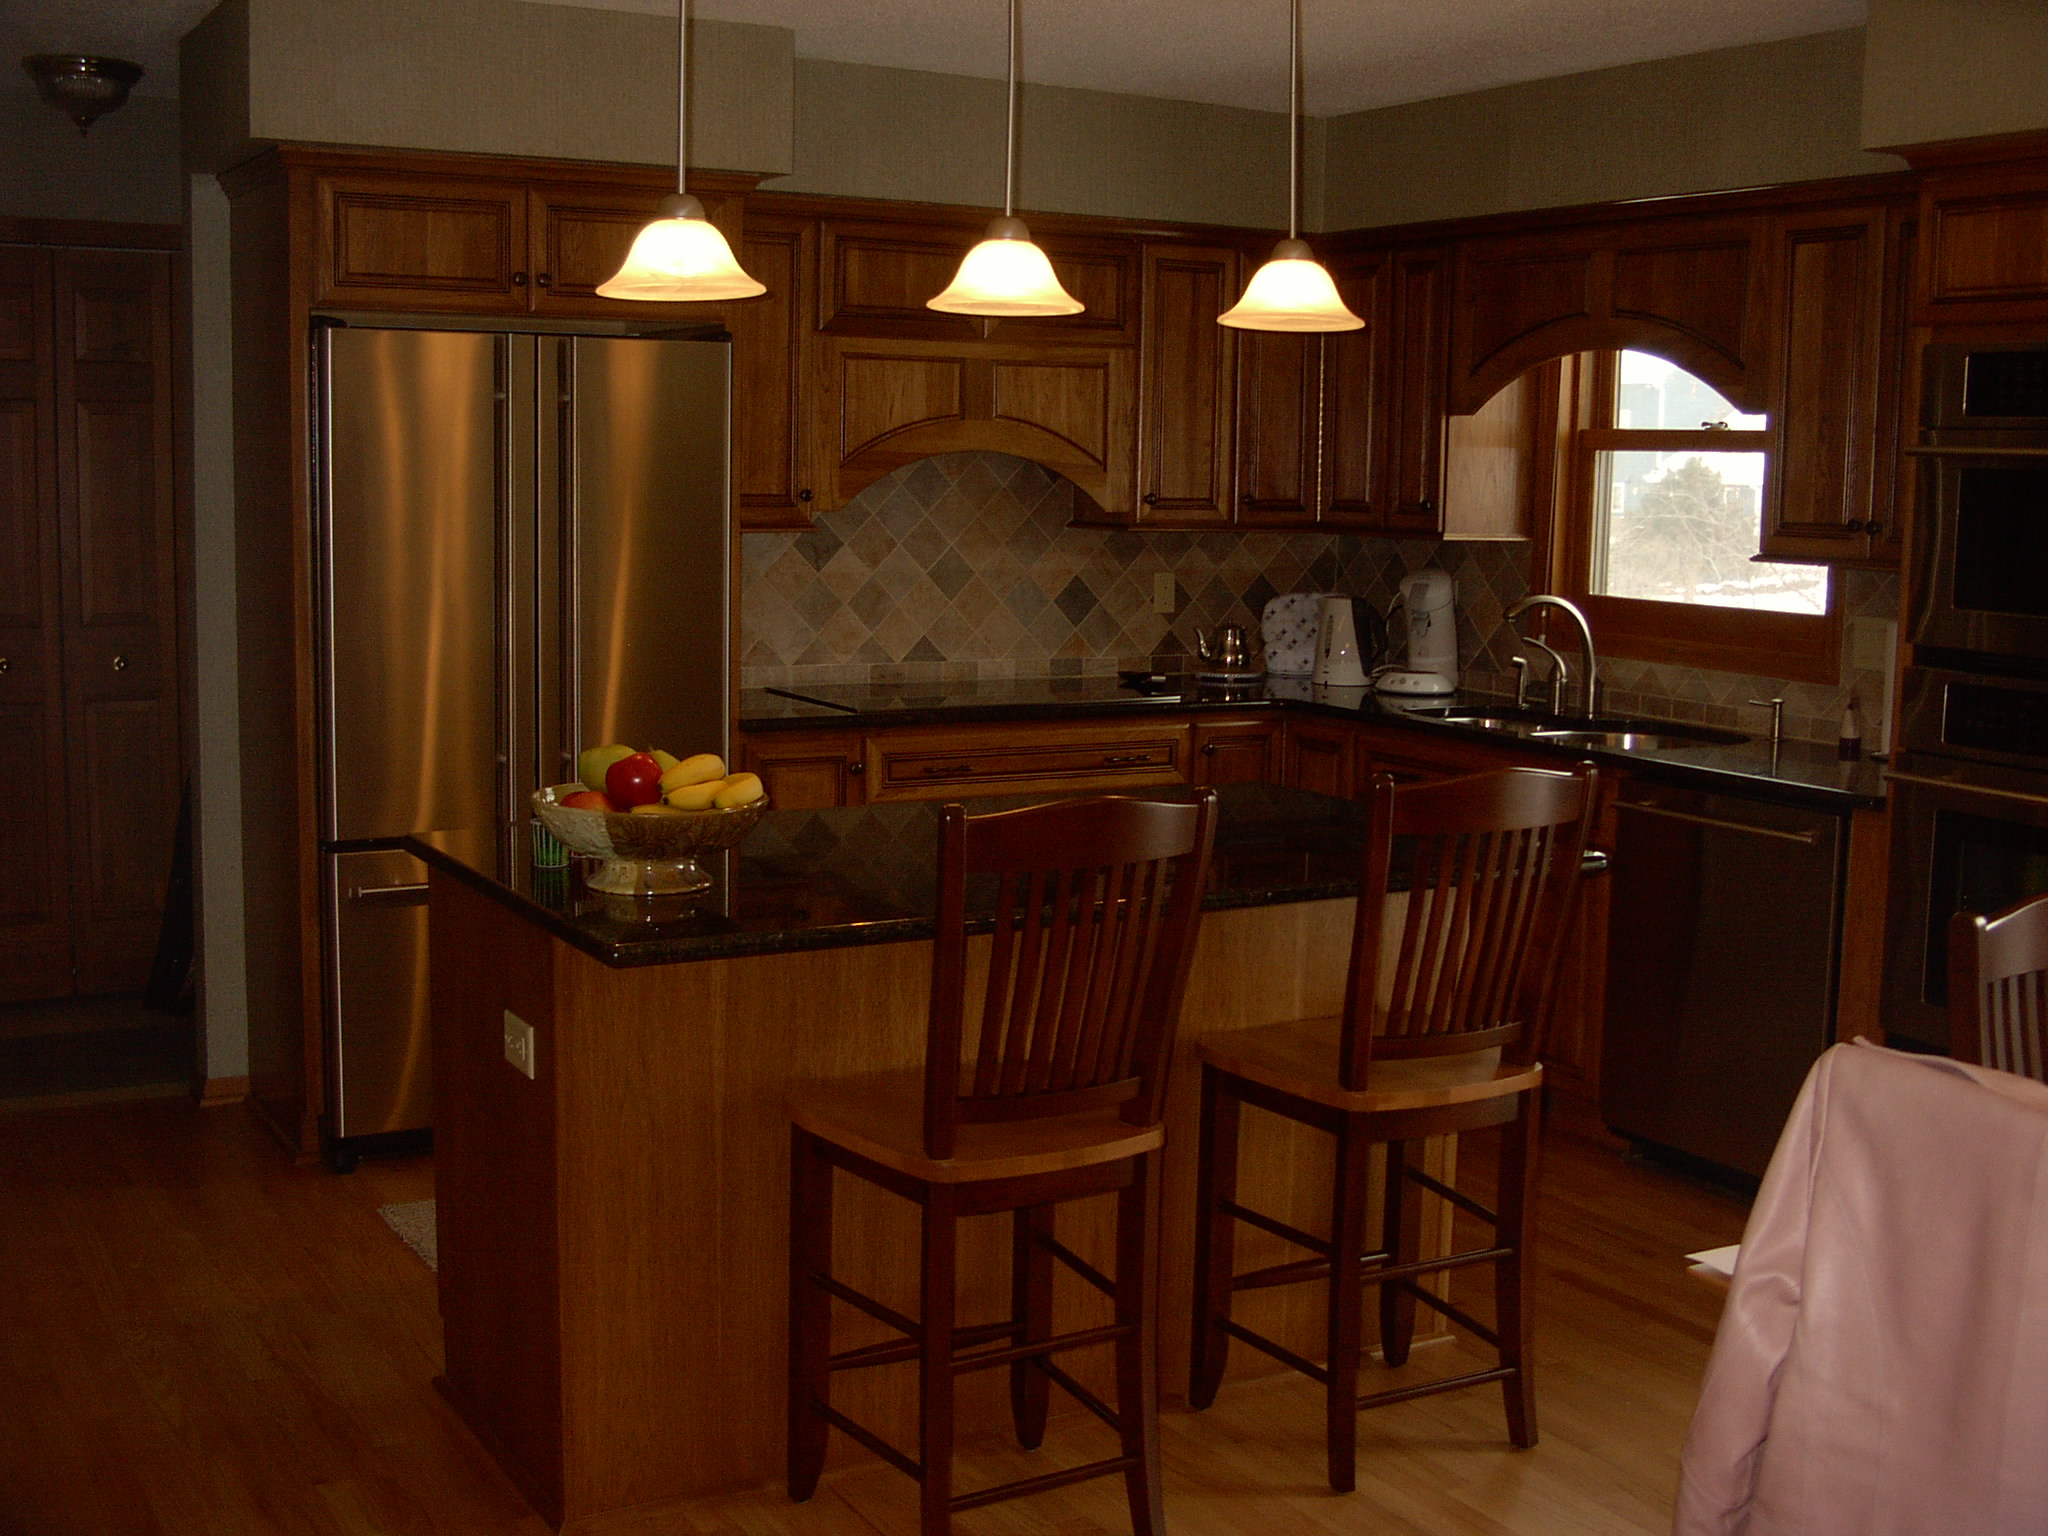 Kitchen Remodels On a Budget